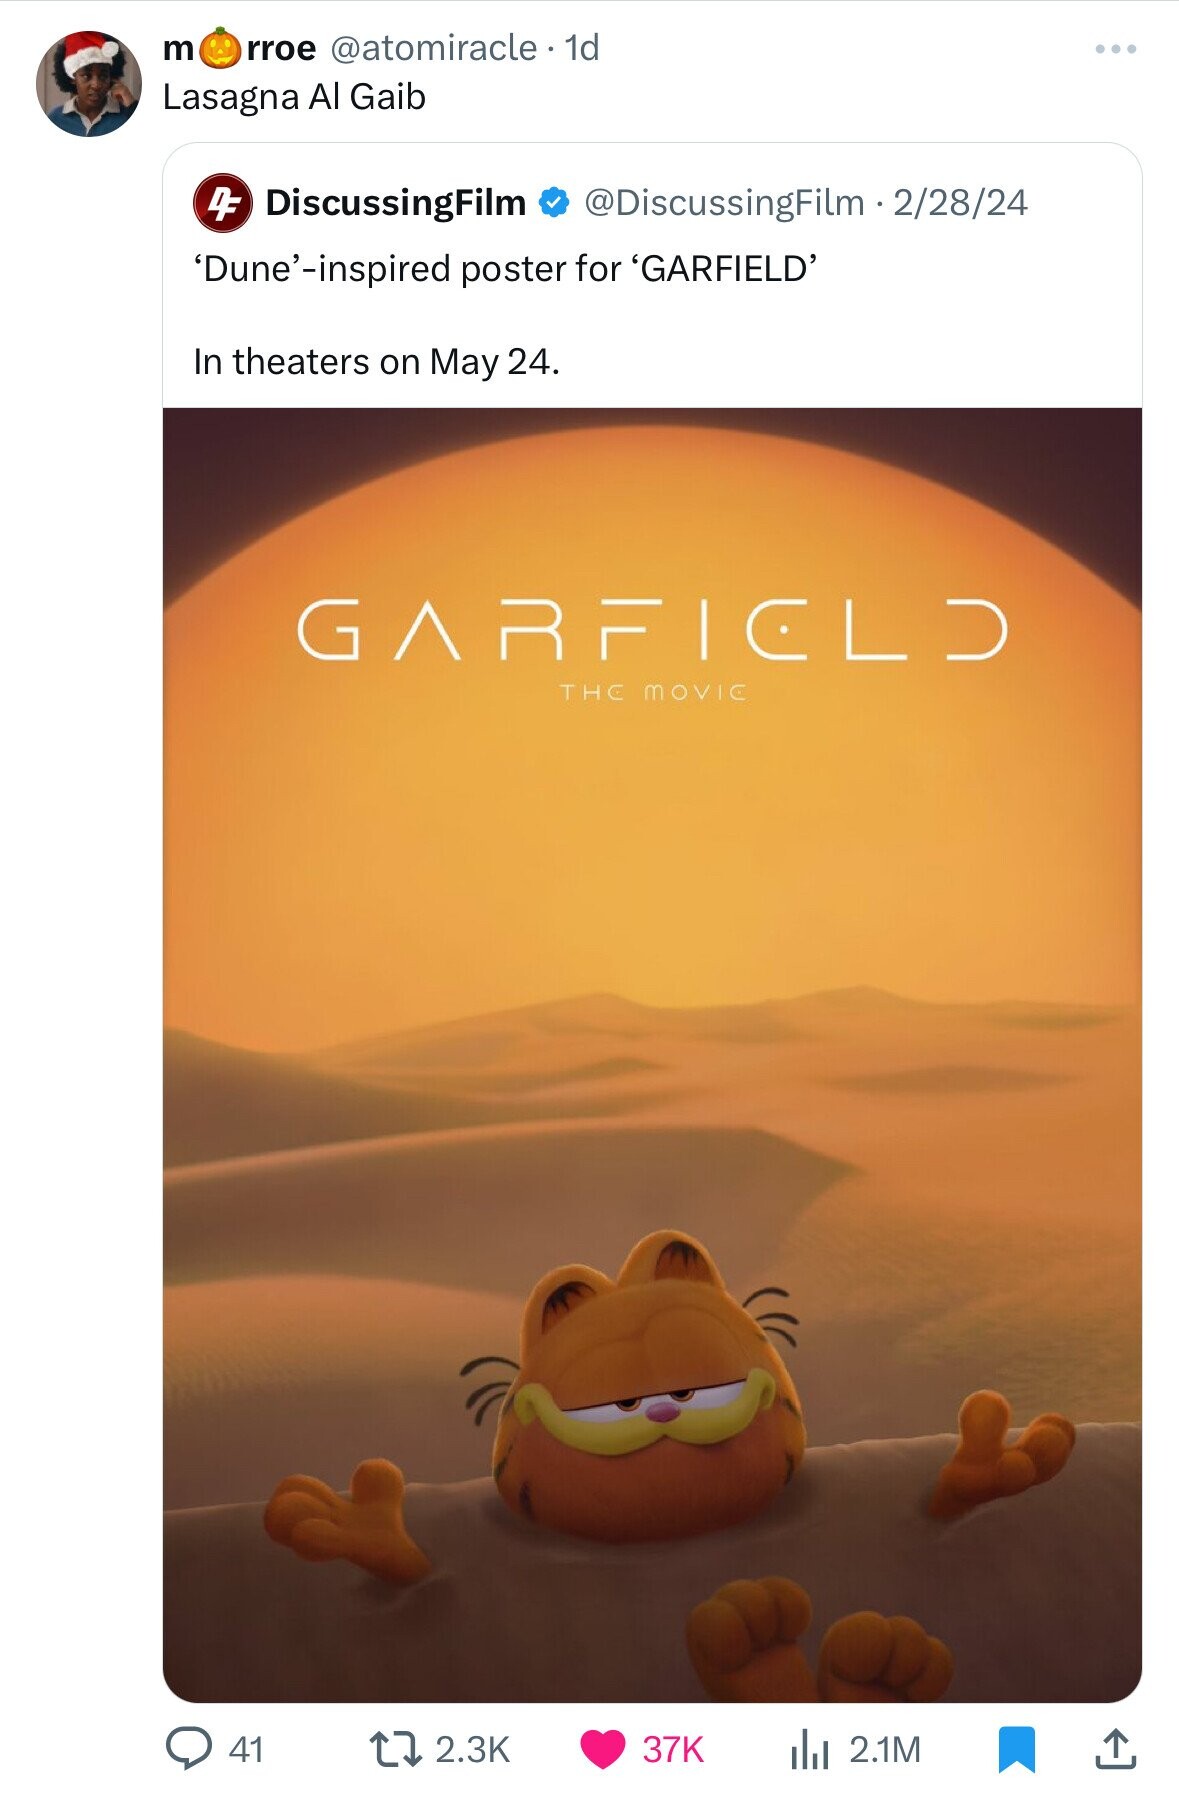 screenshot - m rroe . 1d Lasagna Al Gaib 4 DiscussingFilm 22824 'Dune'inspired poster for 'Garfield' In theaters on May 24. Garfield The Movic 41 37K l 2.1M